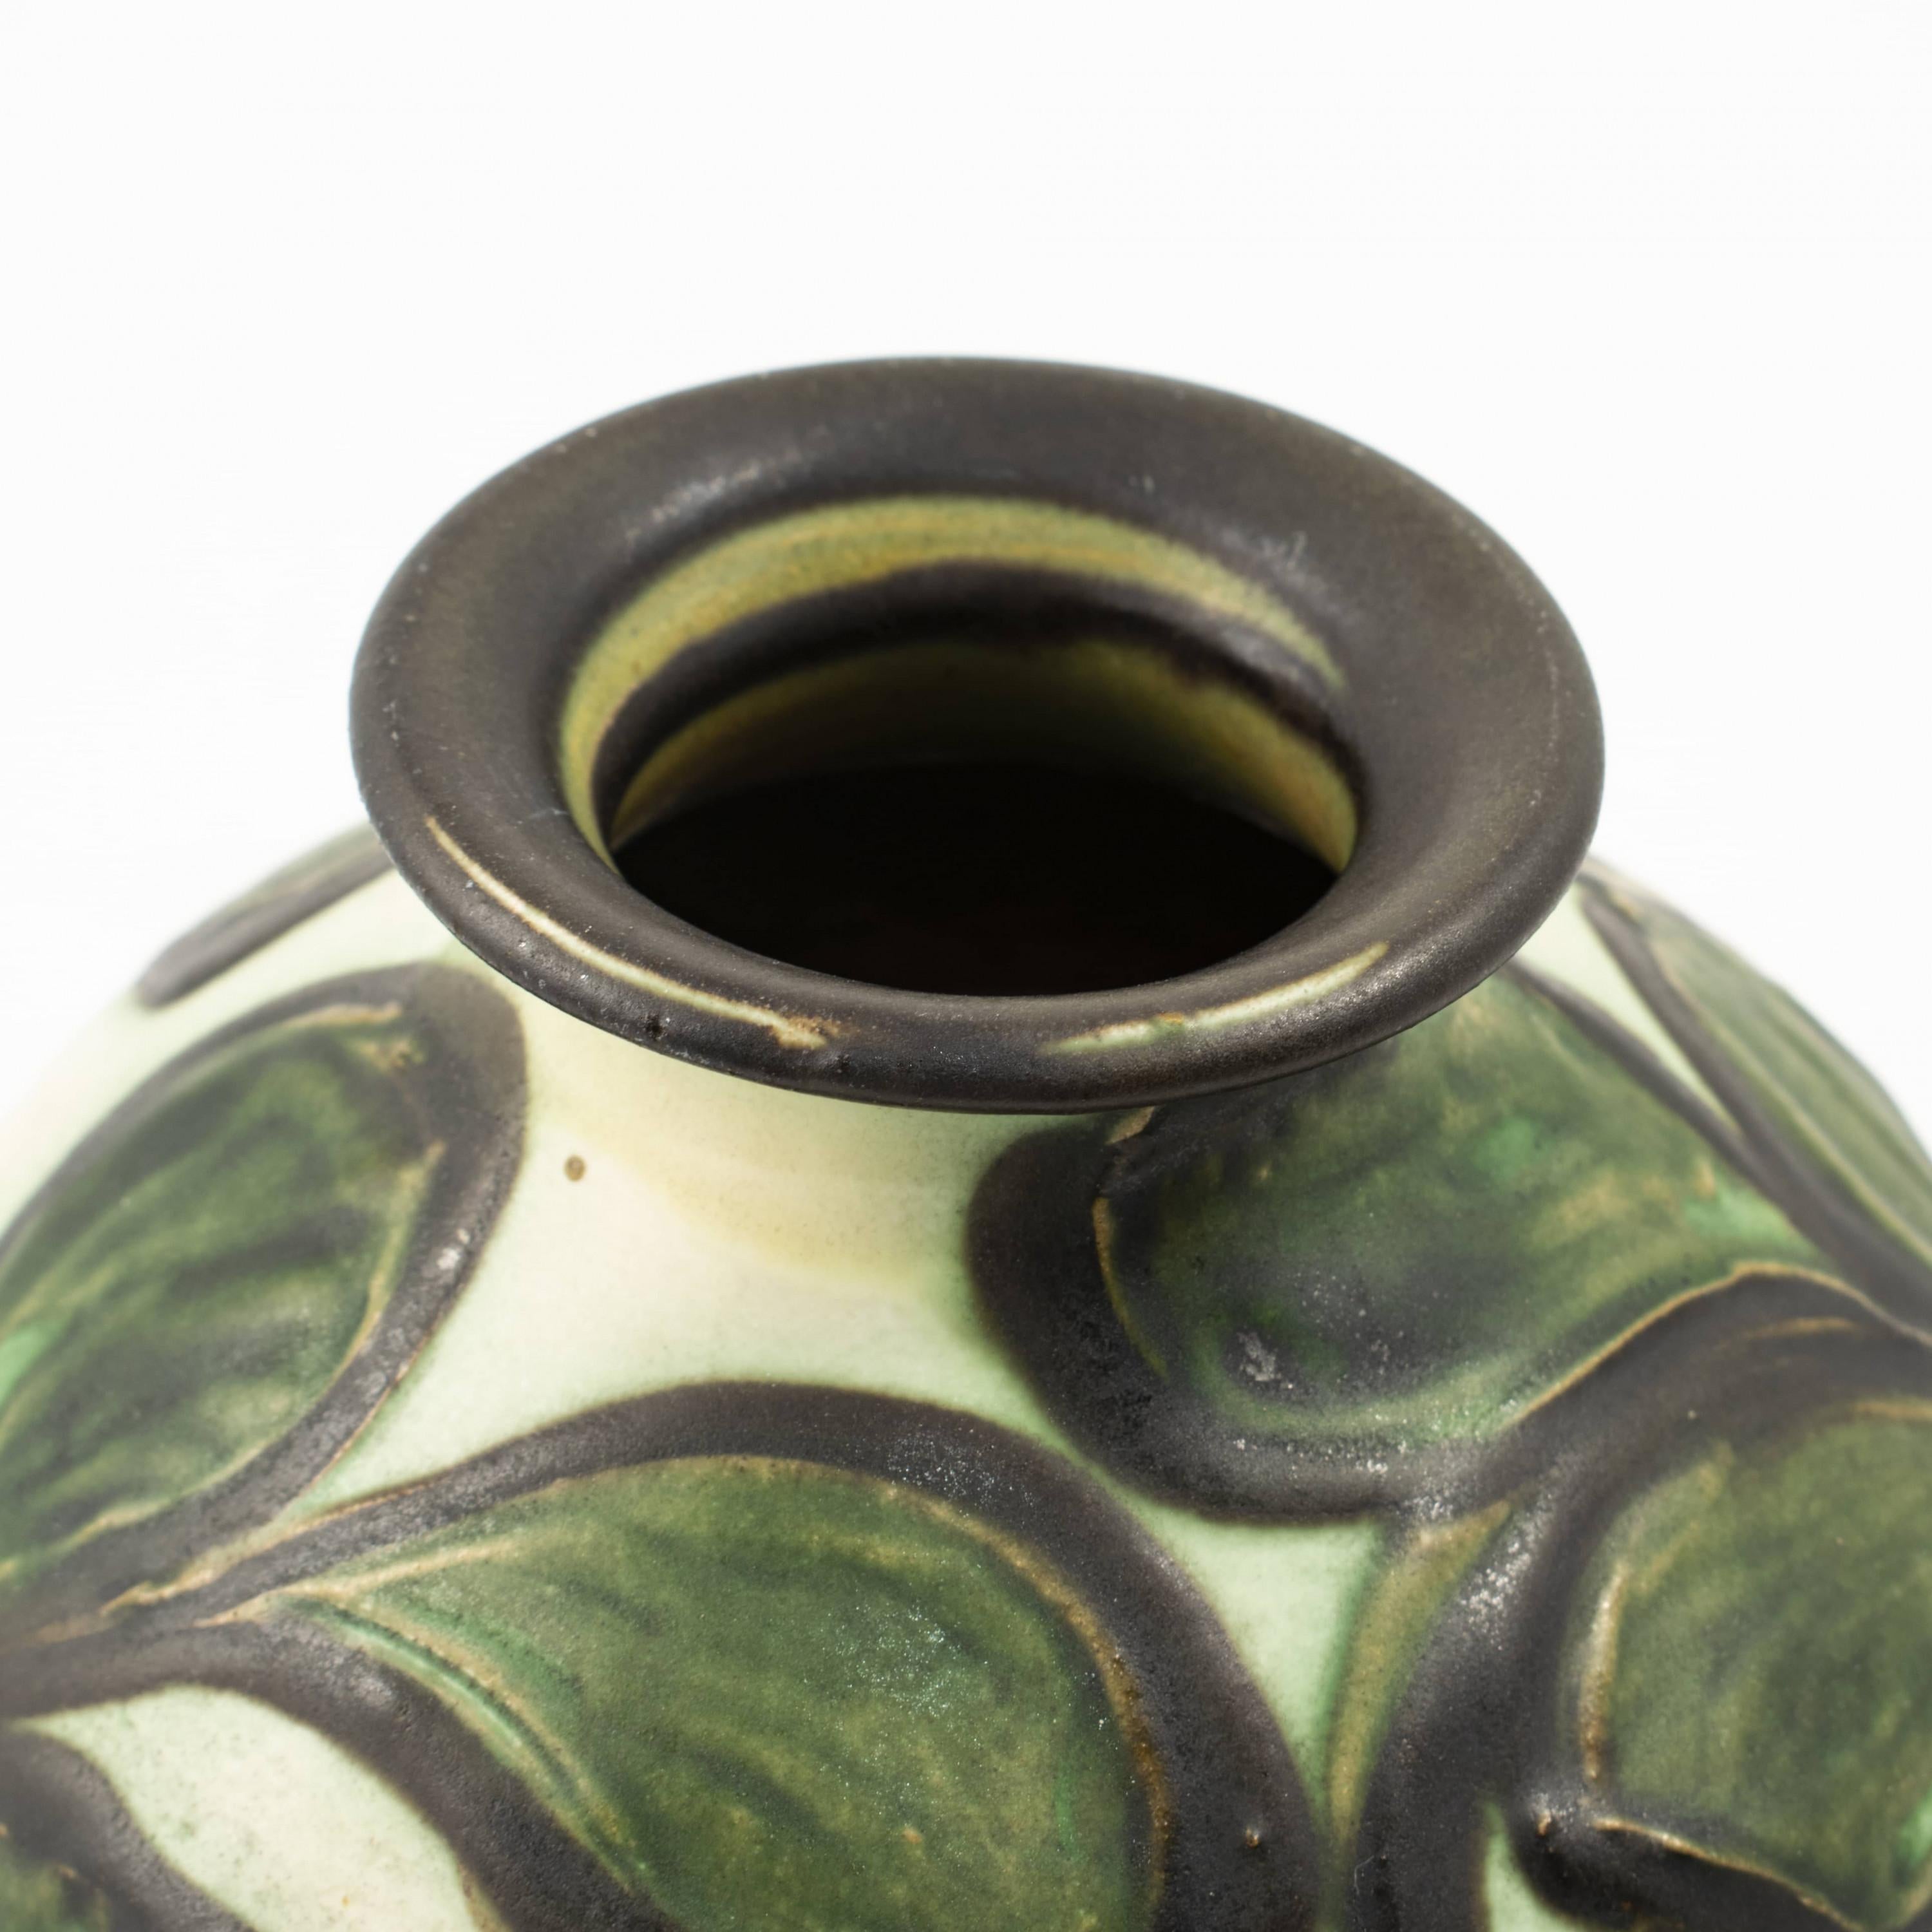 Kähler vase, elegant and beautiful shaped.
Decorated polychrome with a leaves pattern in green glaze.
1920 - 1930 Denmark.

Signed: HÄK (Herman A. Kähler).